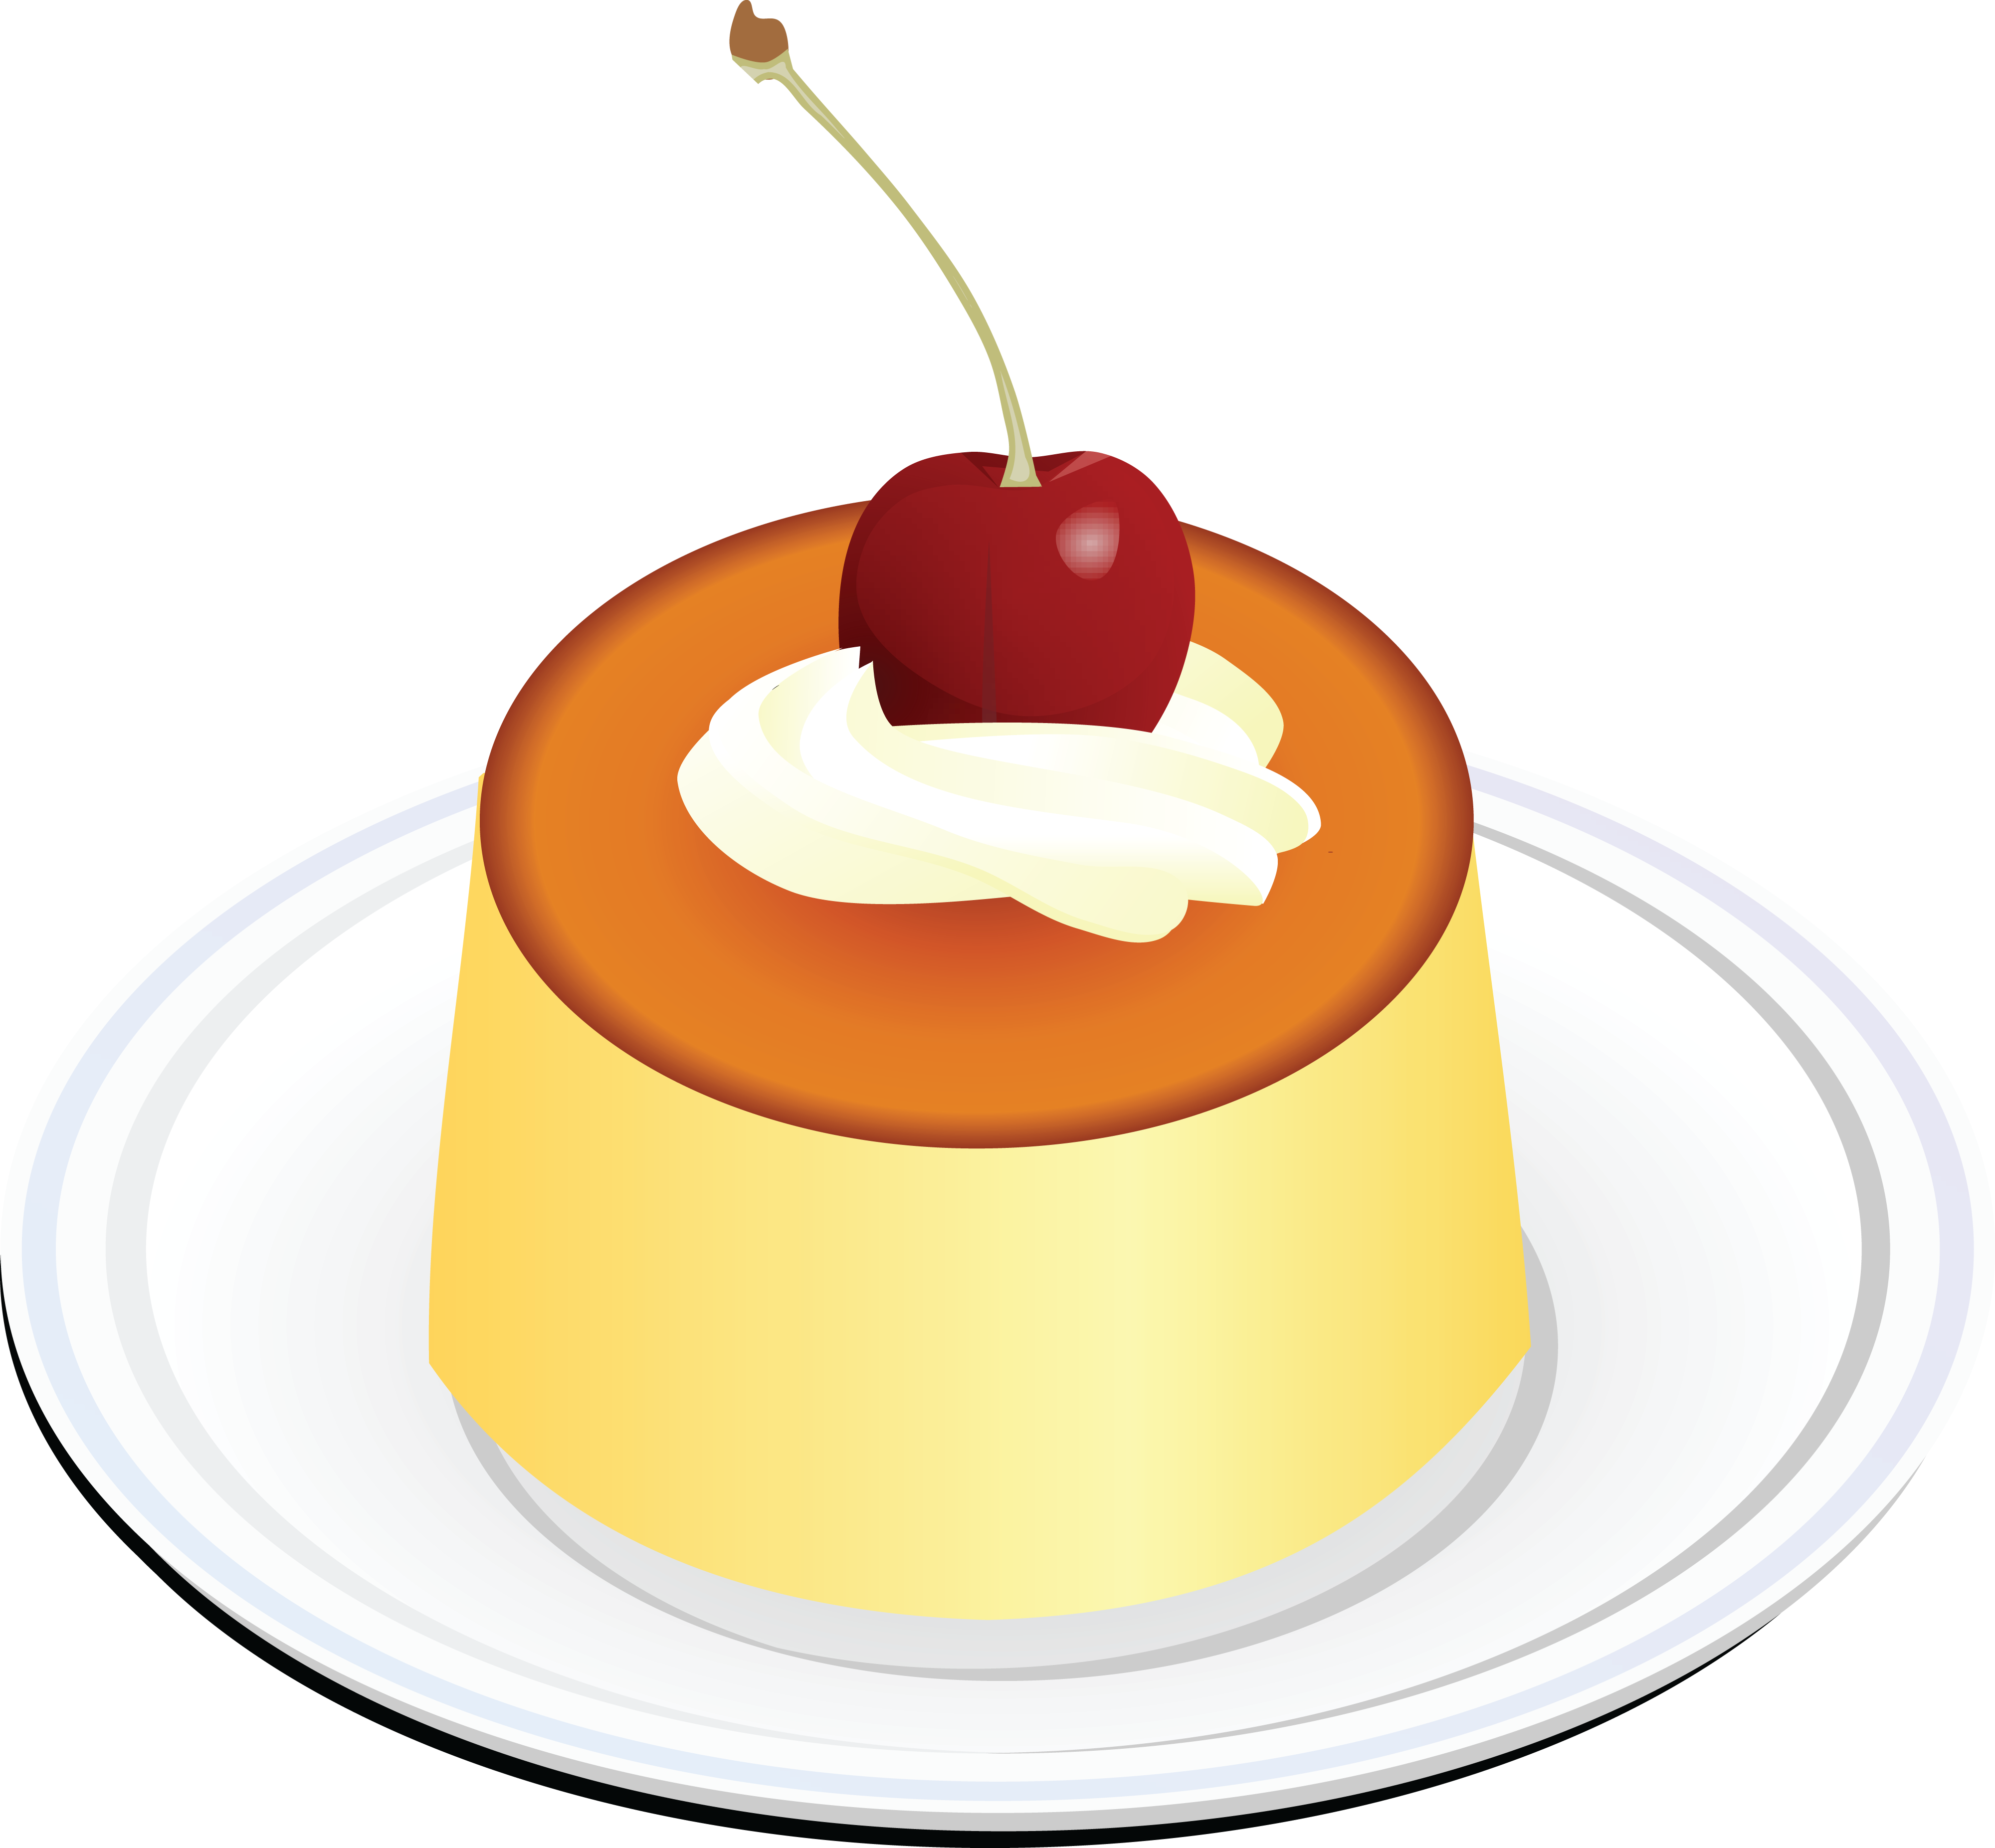 Free Clipart Of A Cake With A Cherry - Fondant (4000x3706)